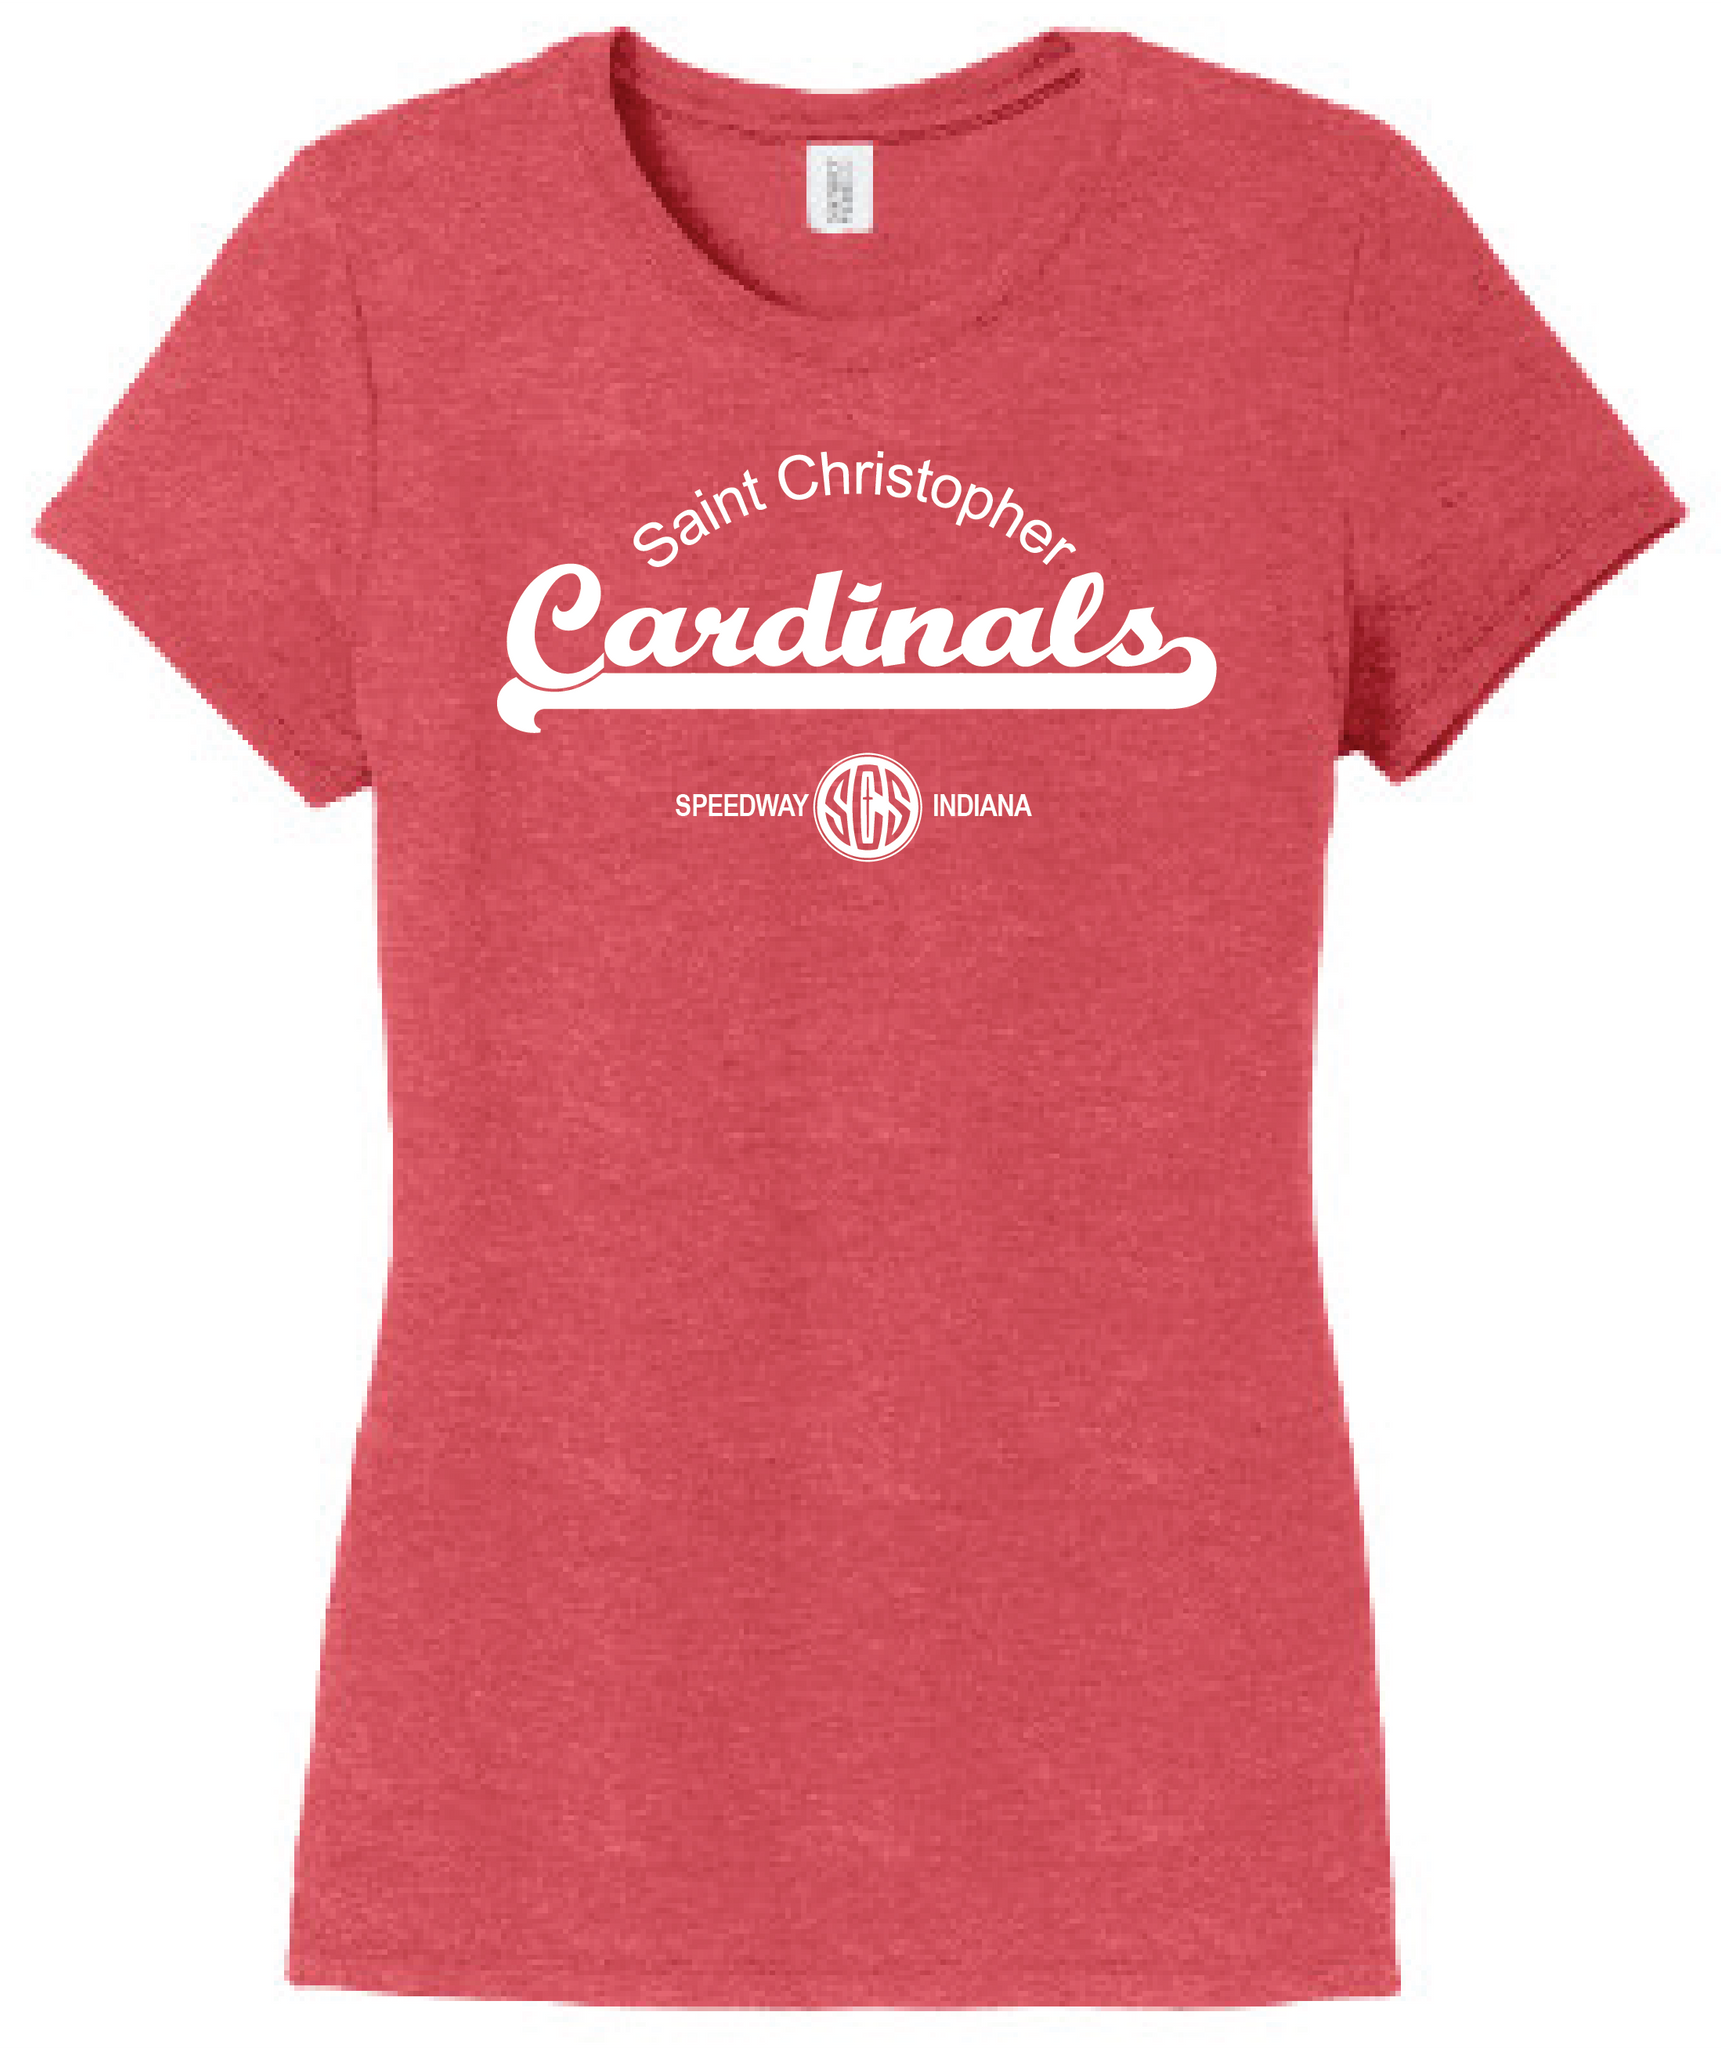 St. Christopher District Made Perfect Tri Ladies T-Shirt - Red Frost